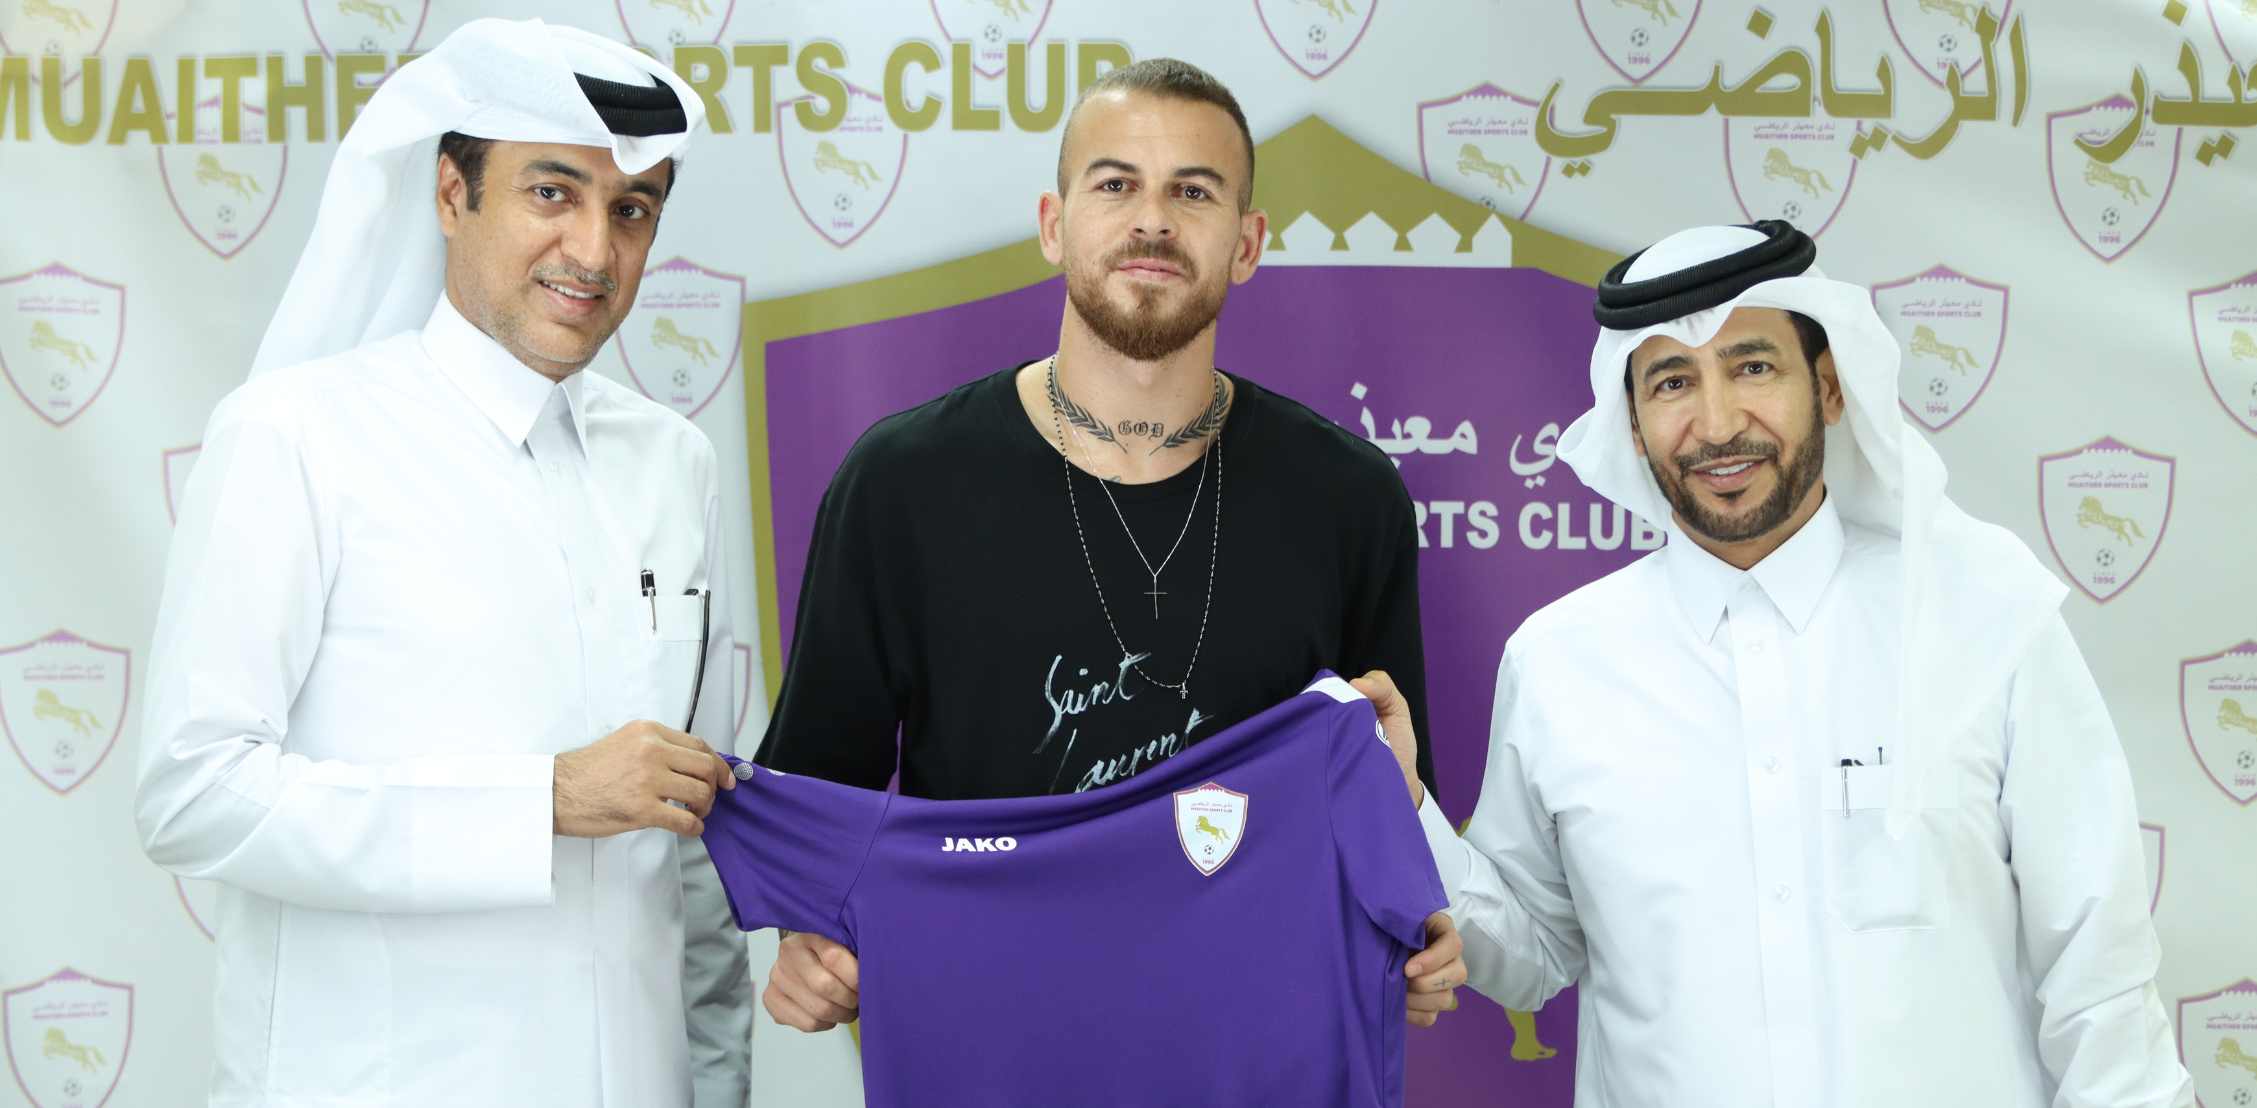 Muaither Club signs its professional file and includes a new striker